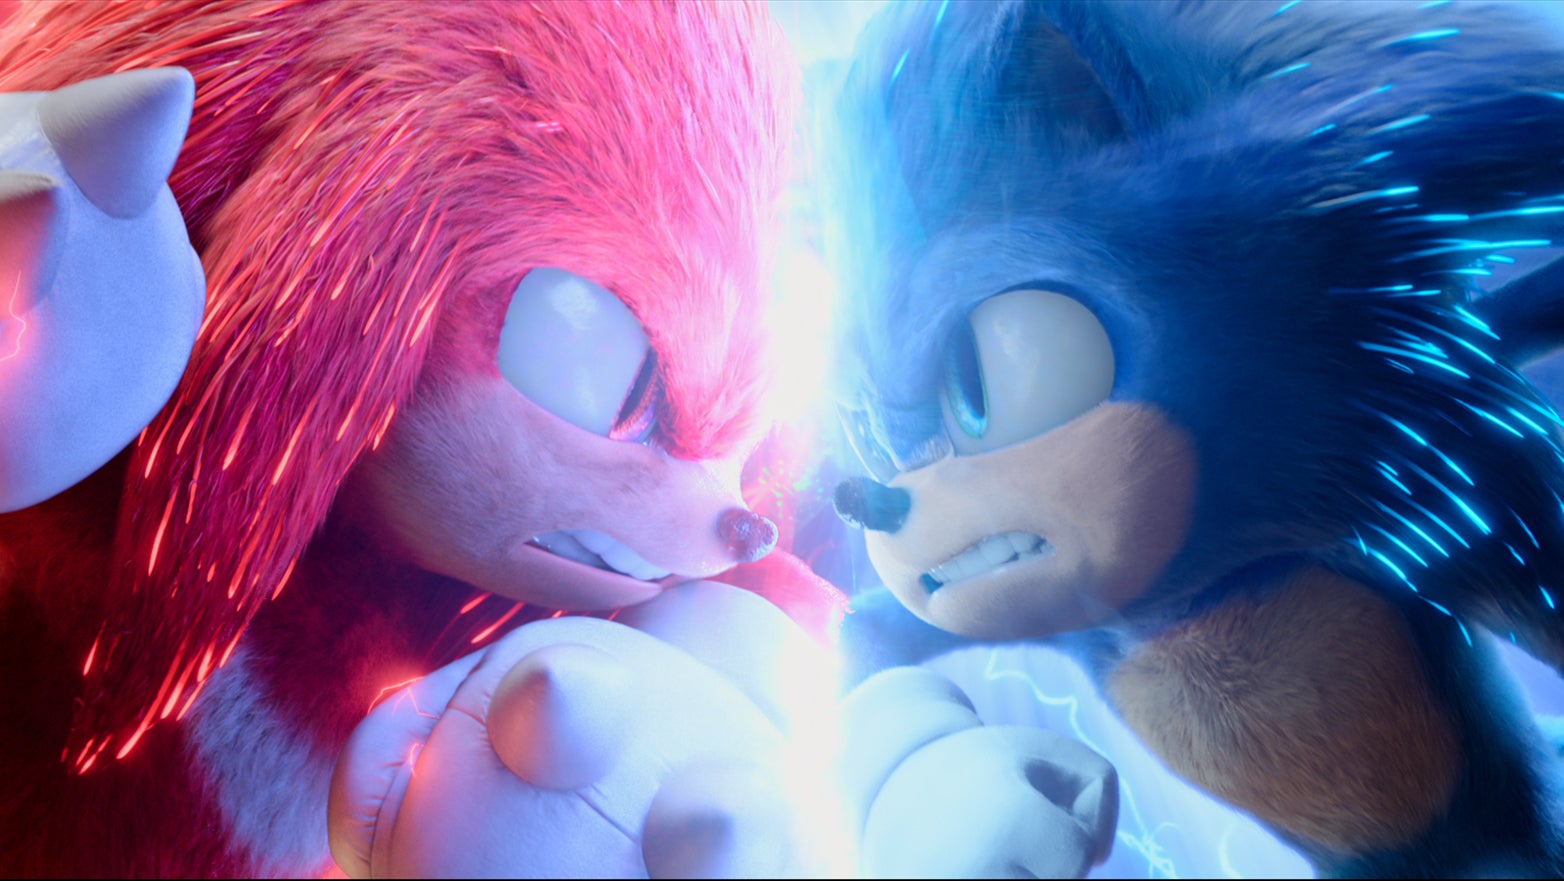 Sonic the Hedgehog 2 puts the video game back into the film series |  